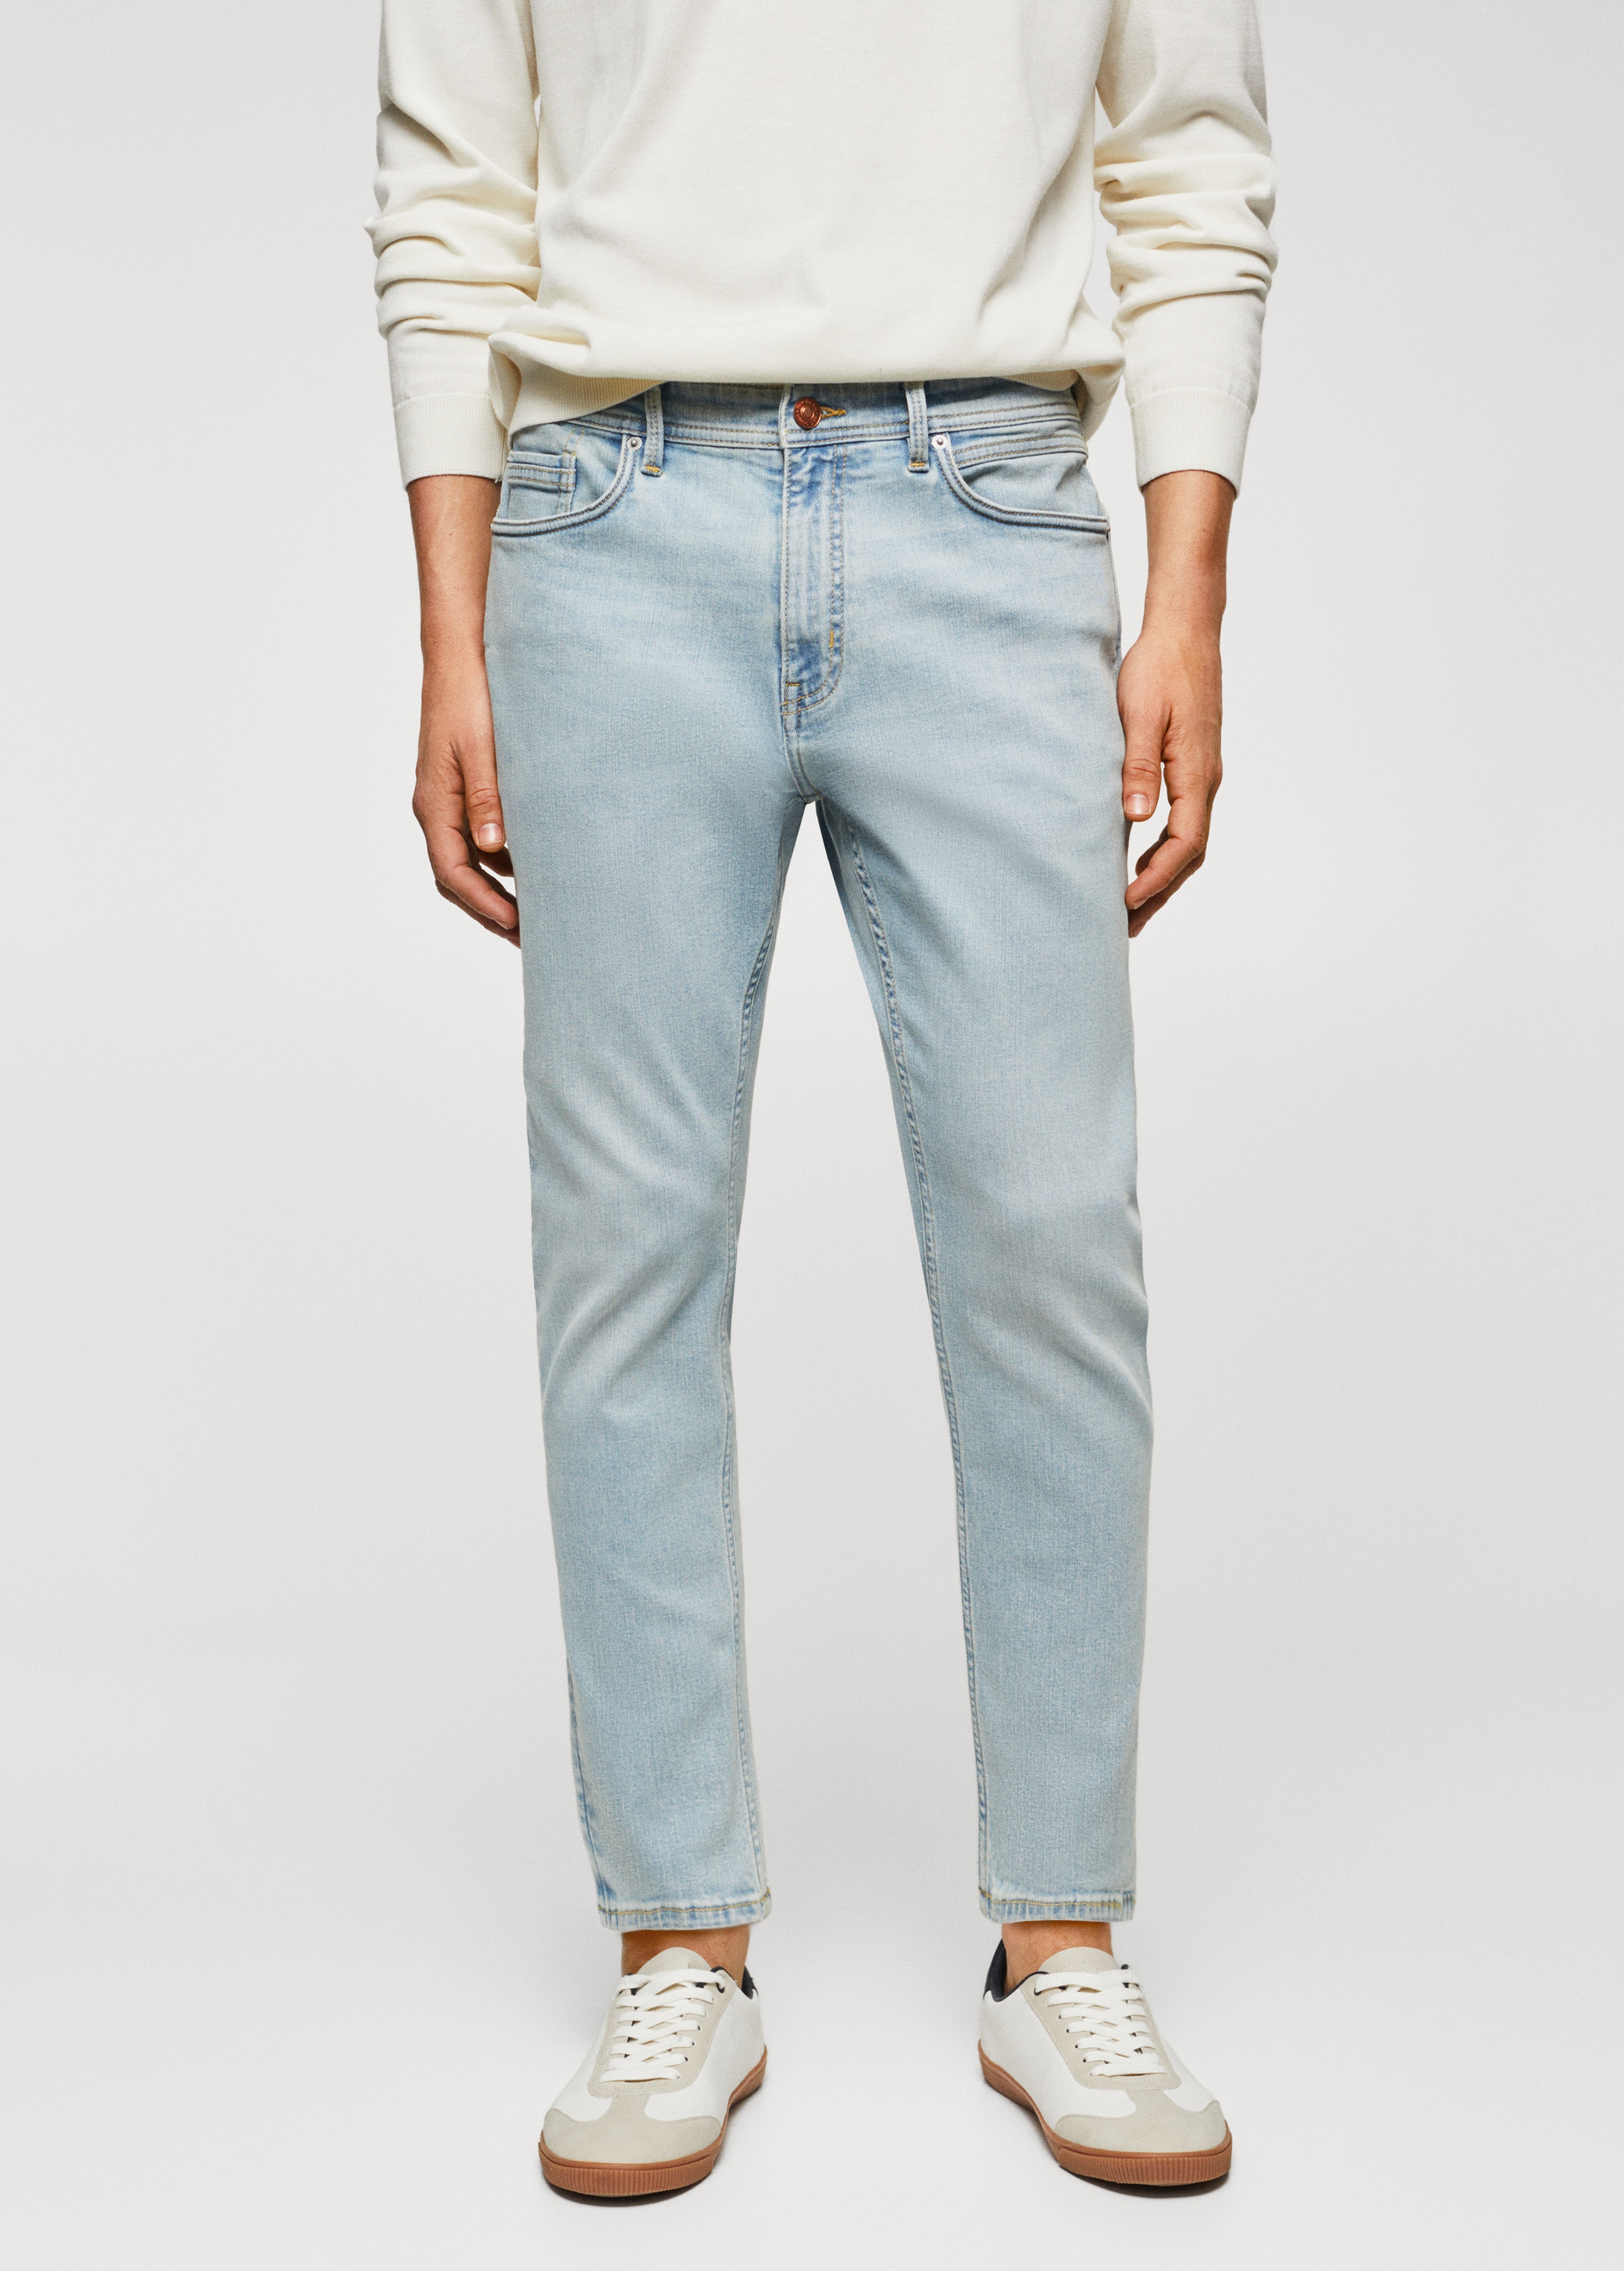 Tom tapered cropped jeans - Medium plane